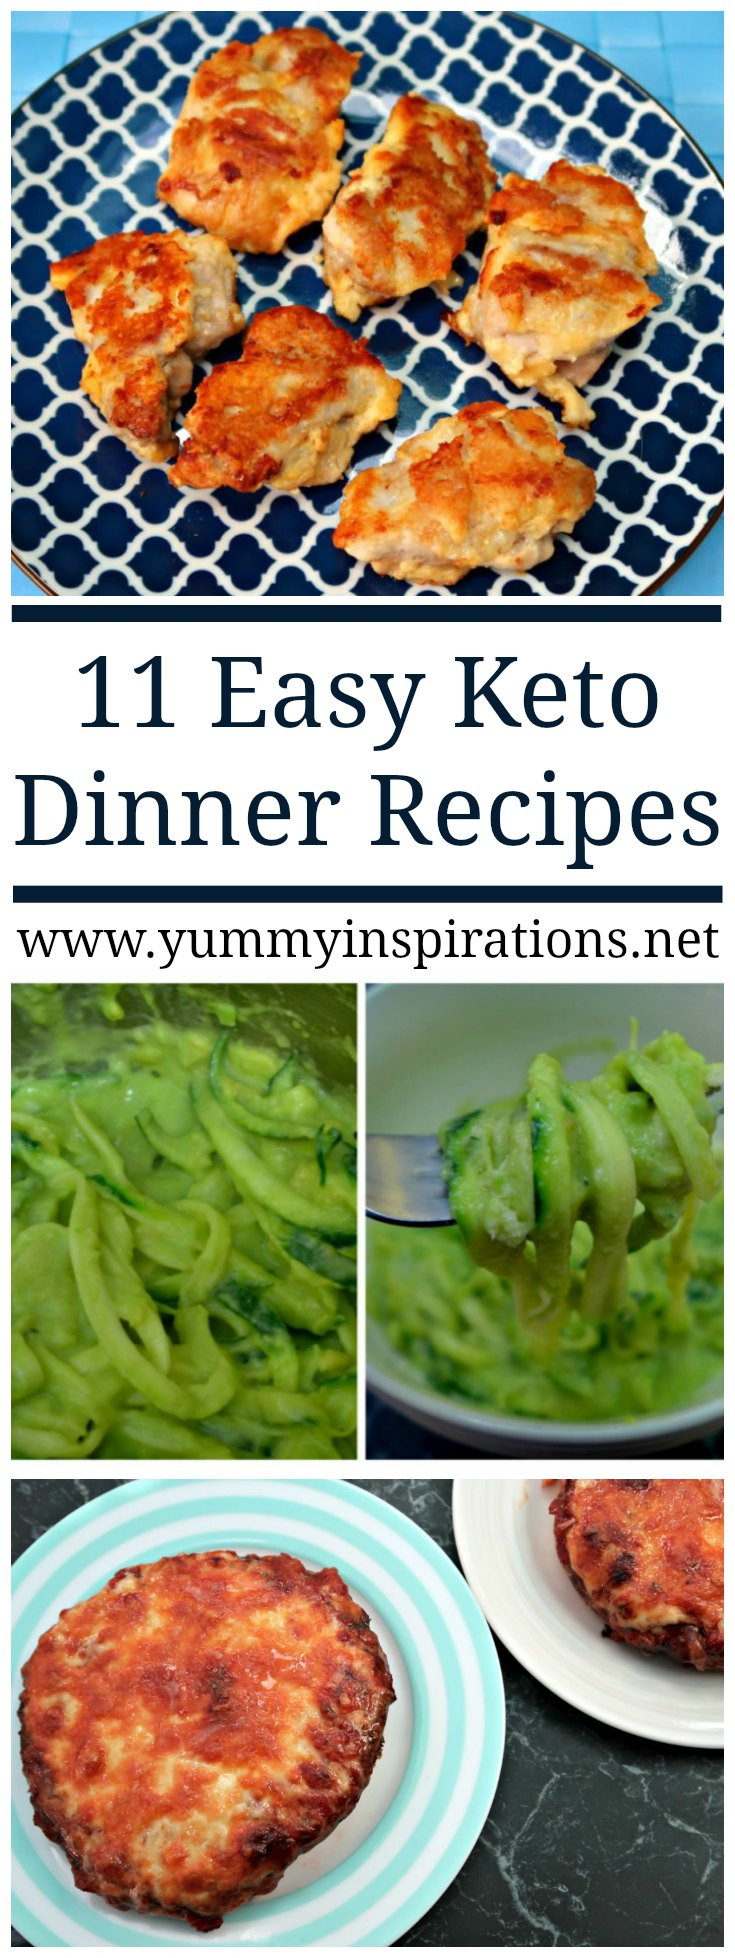 Keto Diet Recipes Dinners Healthy
 11 Easy Keto Dinner Recipes Quick Low Carb Ketogenic